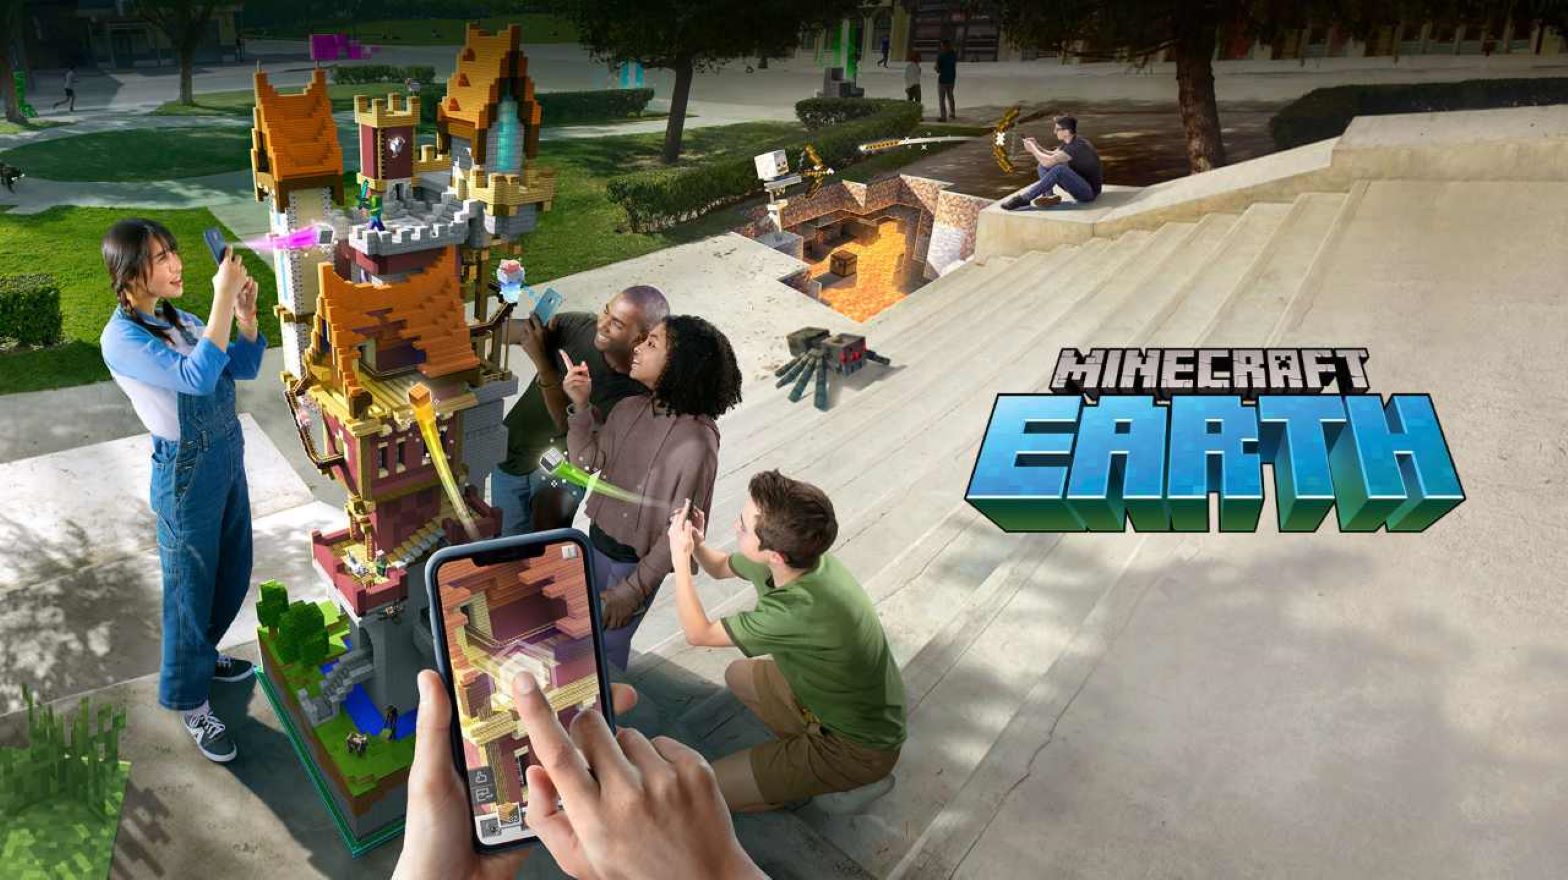 MinecraftEarth hero image. Four teenagers on their phones building a structure in Minecraft Earth